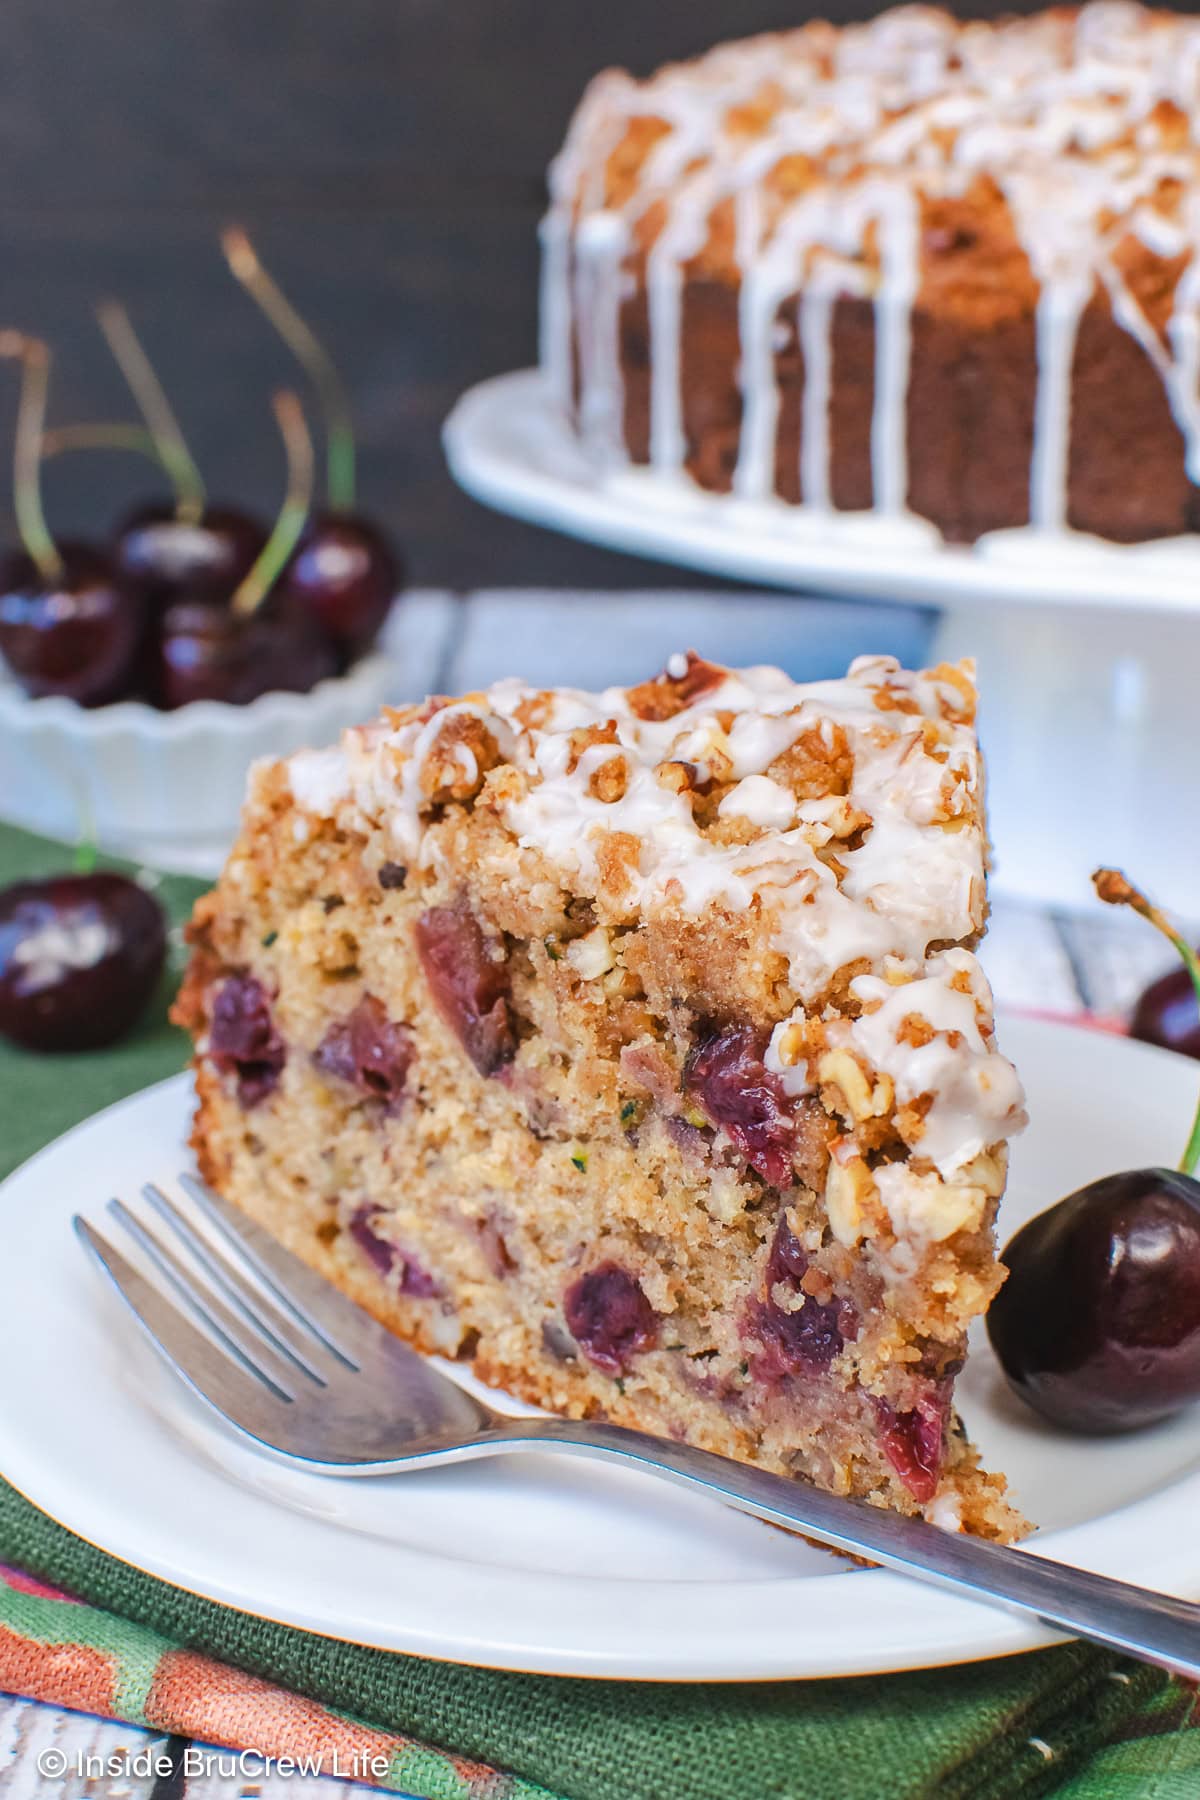 A slice of zucchini coffee cake with cherries in it.